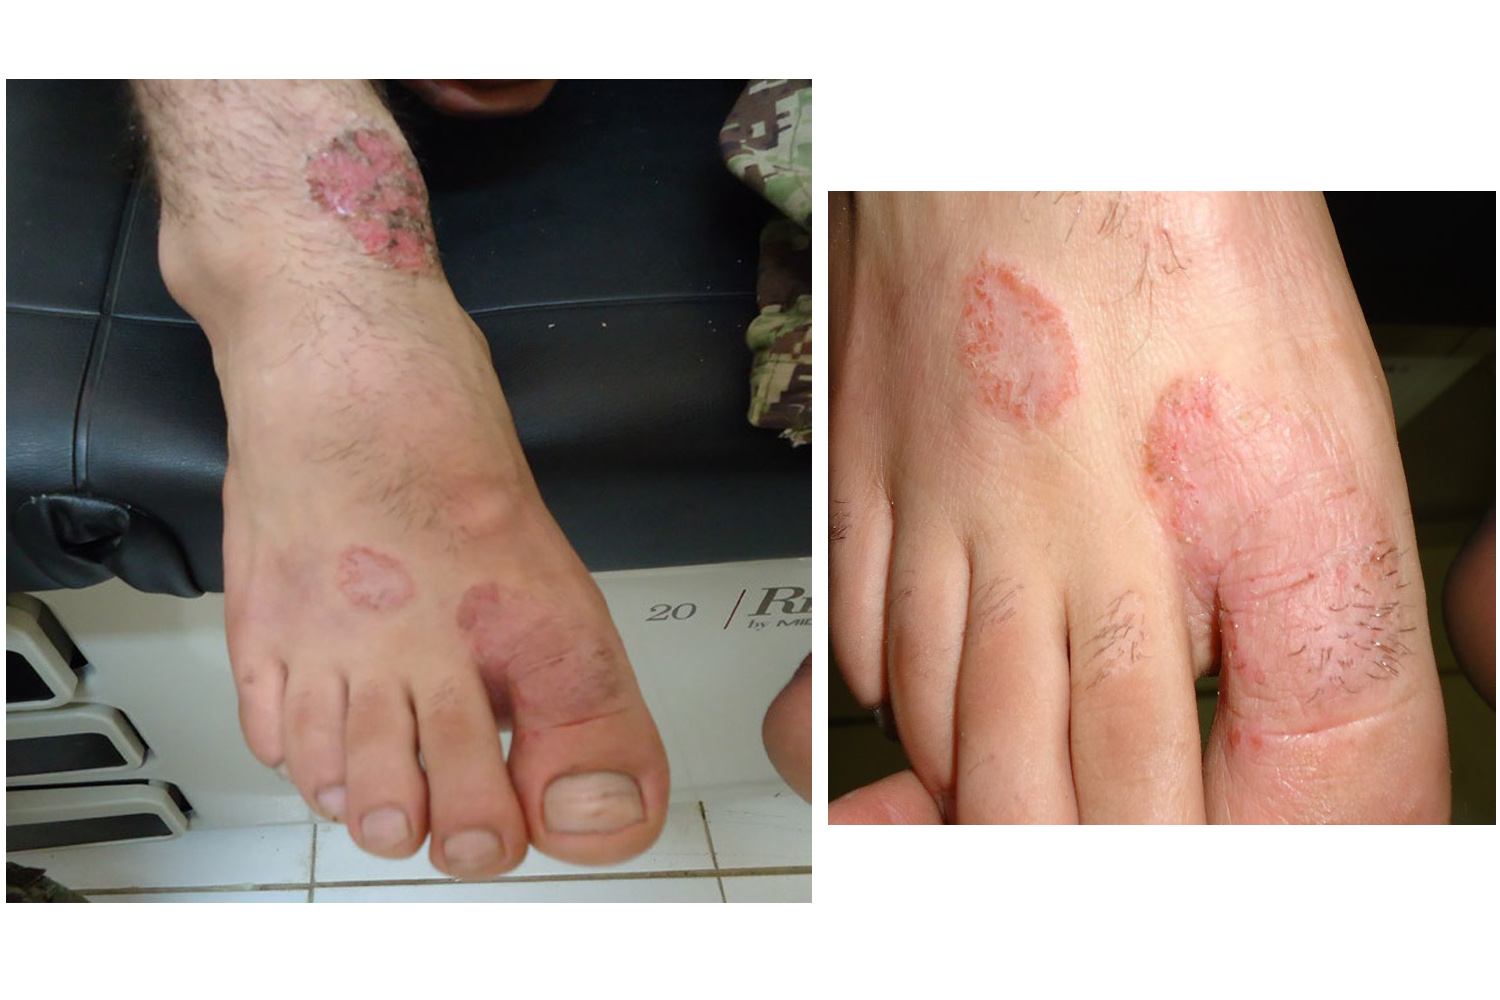 https://www.imagejournals.org/admin/articles-images/120-tinea-pedis-images.jpg